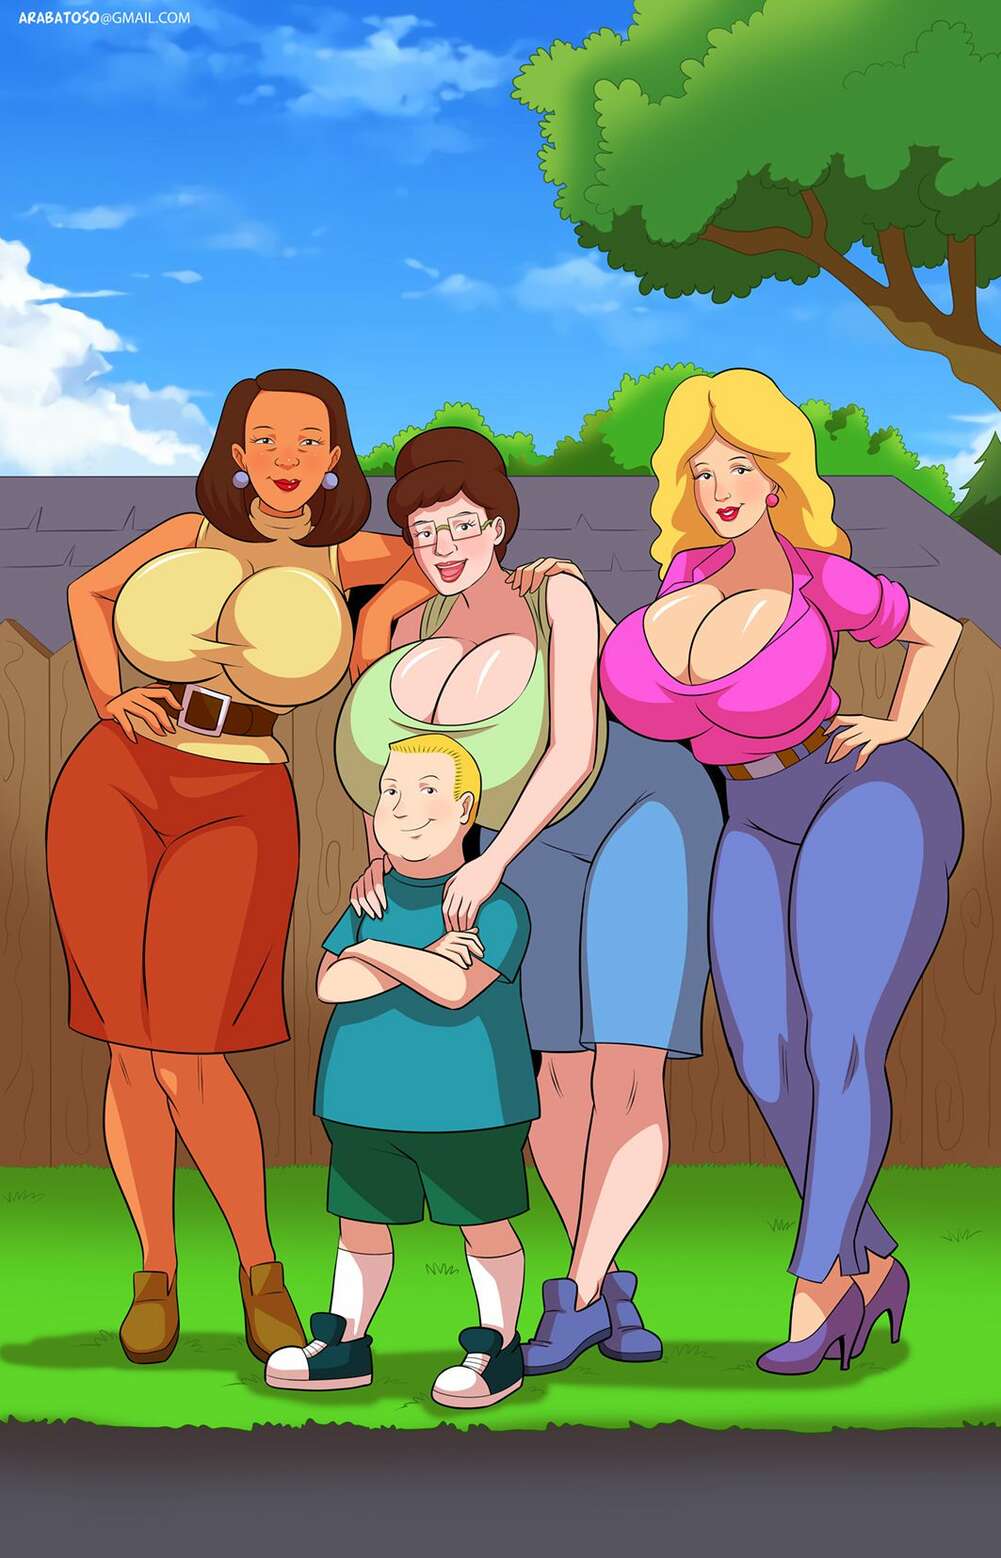 Big Tits Cartoons About - Cartoon Mom Sex With Big Tits | Sex Pictures Pass